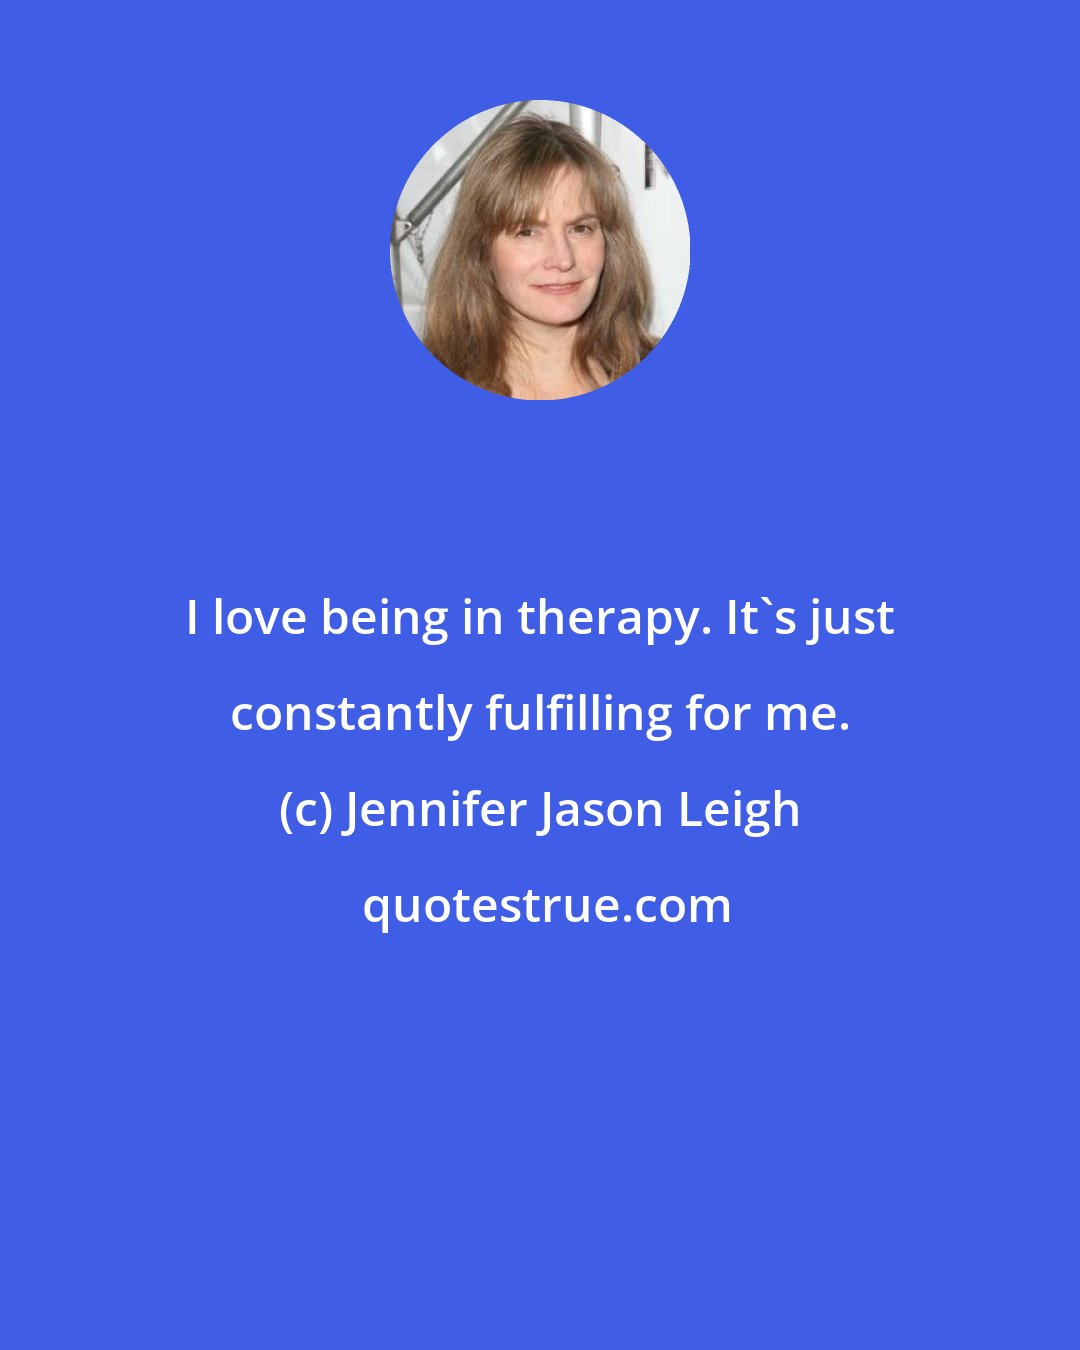 Jennifer Jason Leigh: I love being in therapy. It's just constantly fulfilling for me.